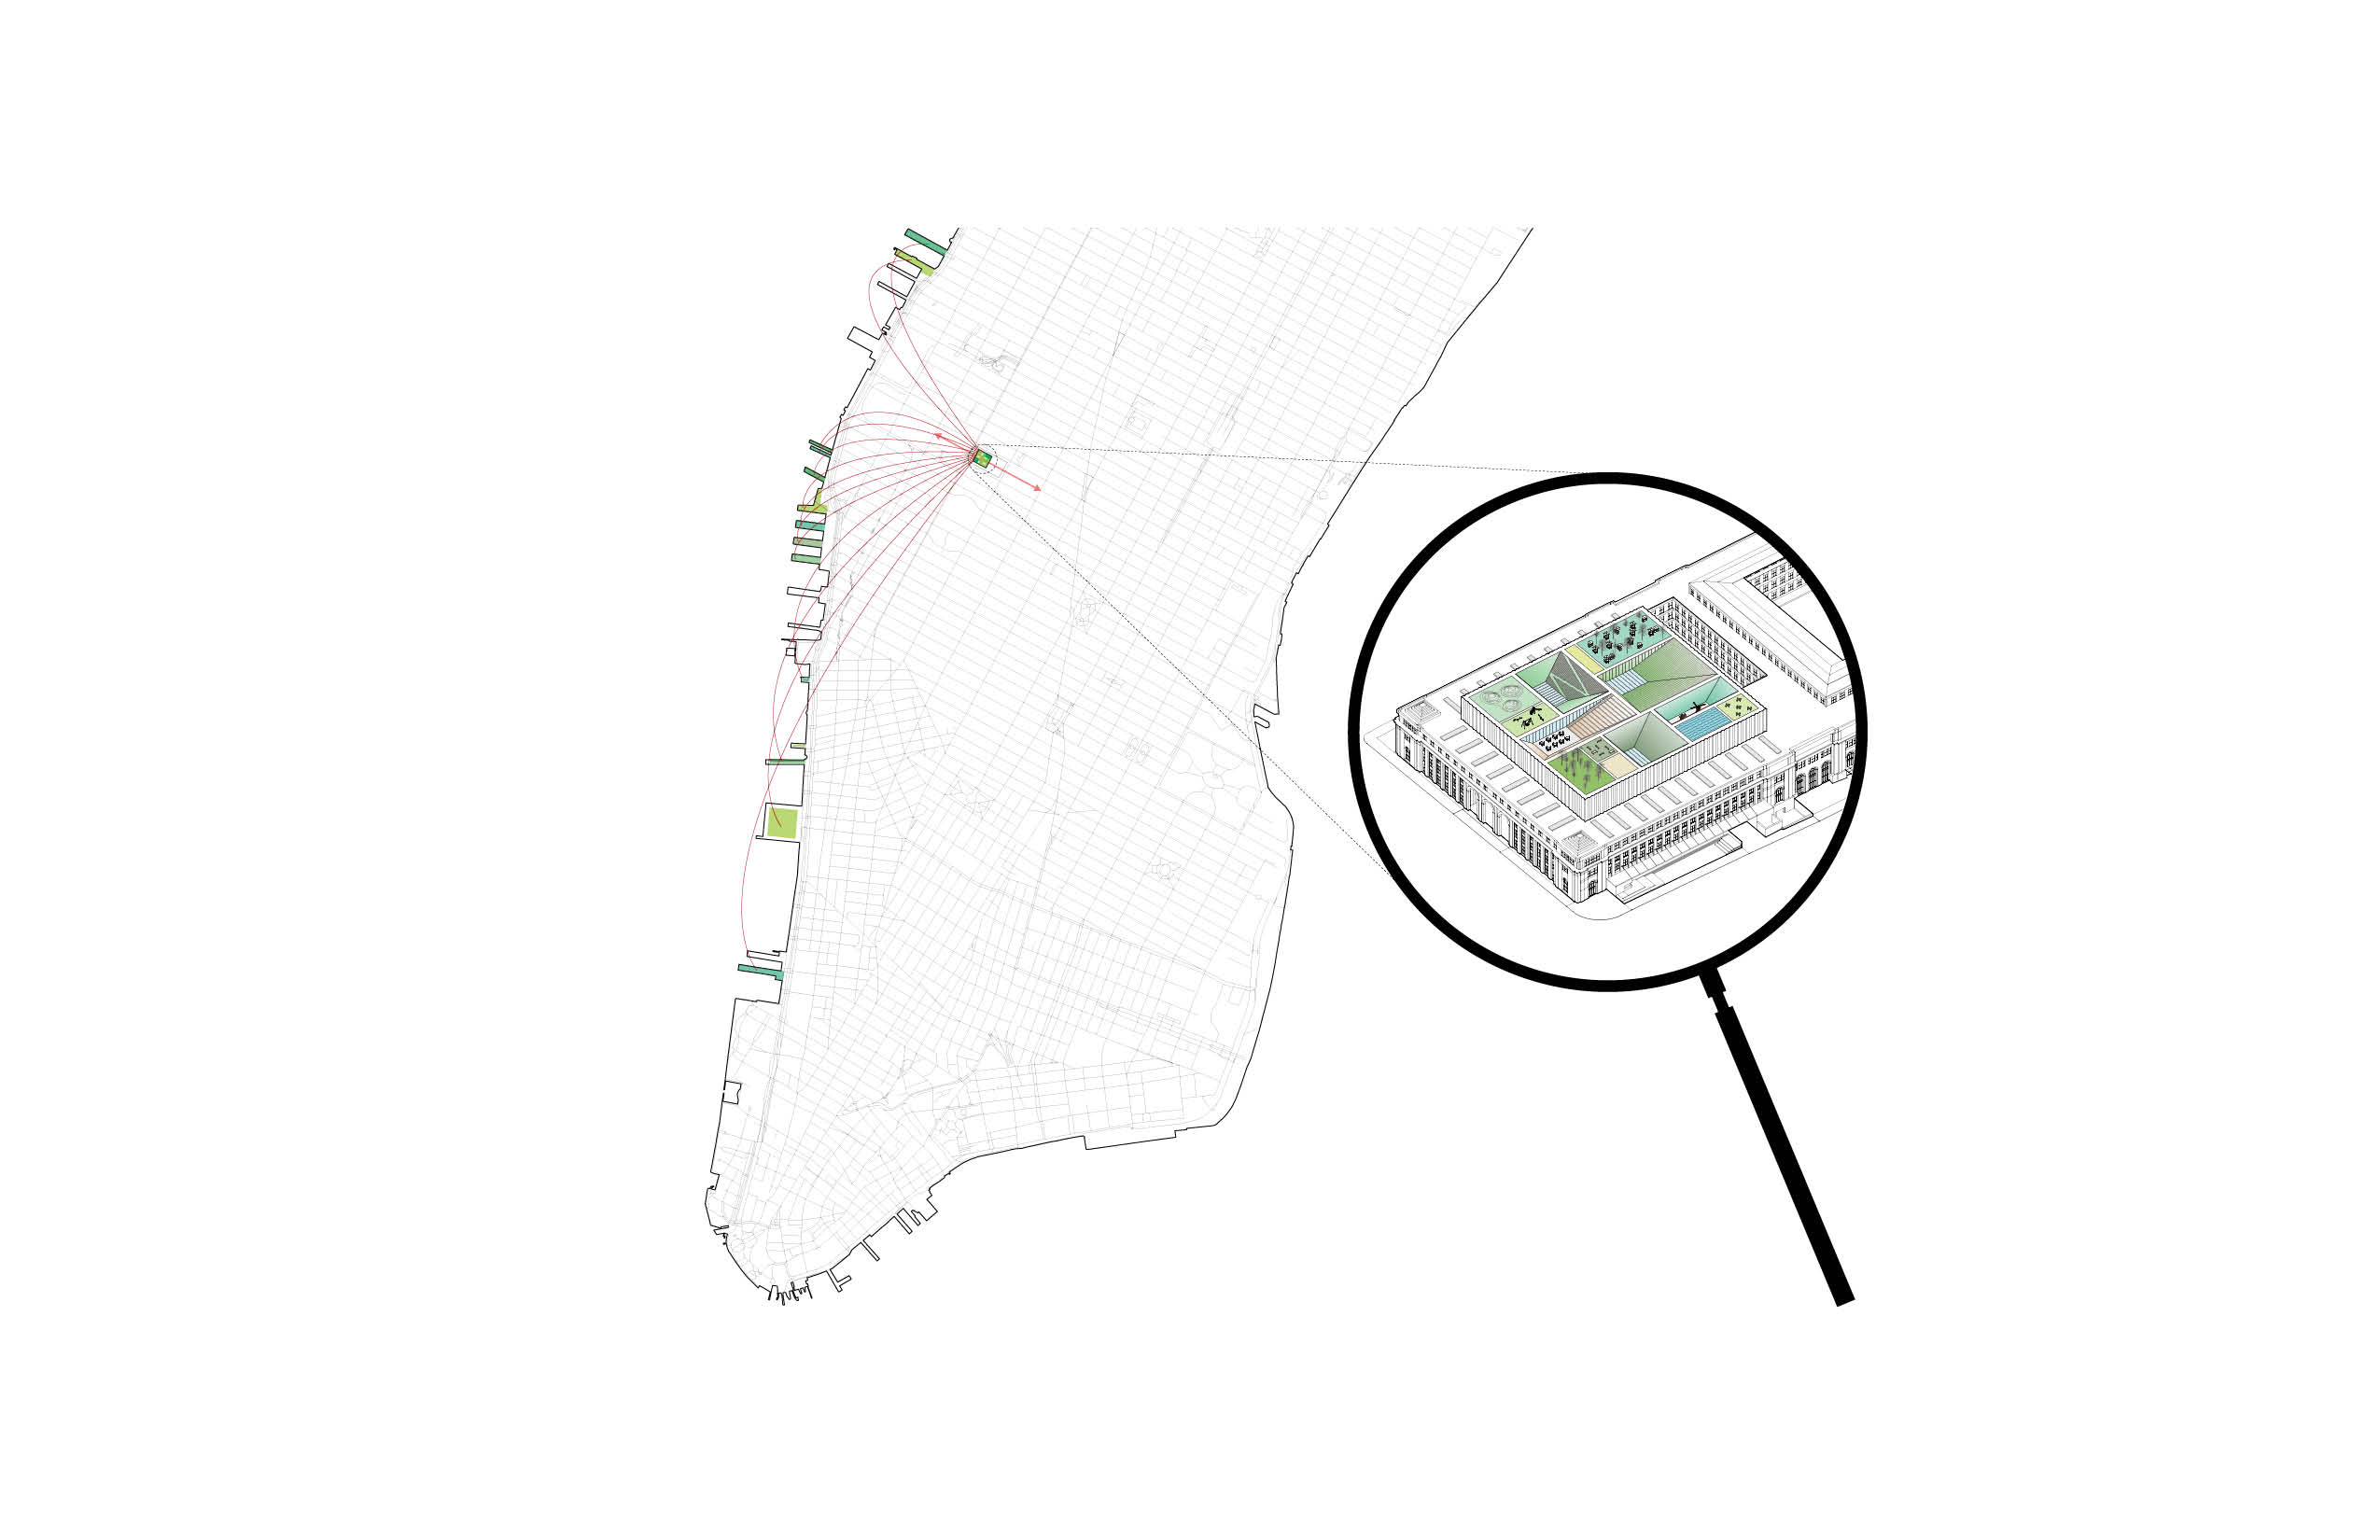 A diagram showing the location of the Farley building in Manhattan.